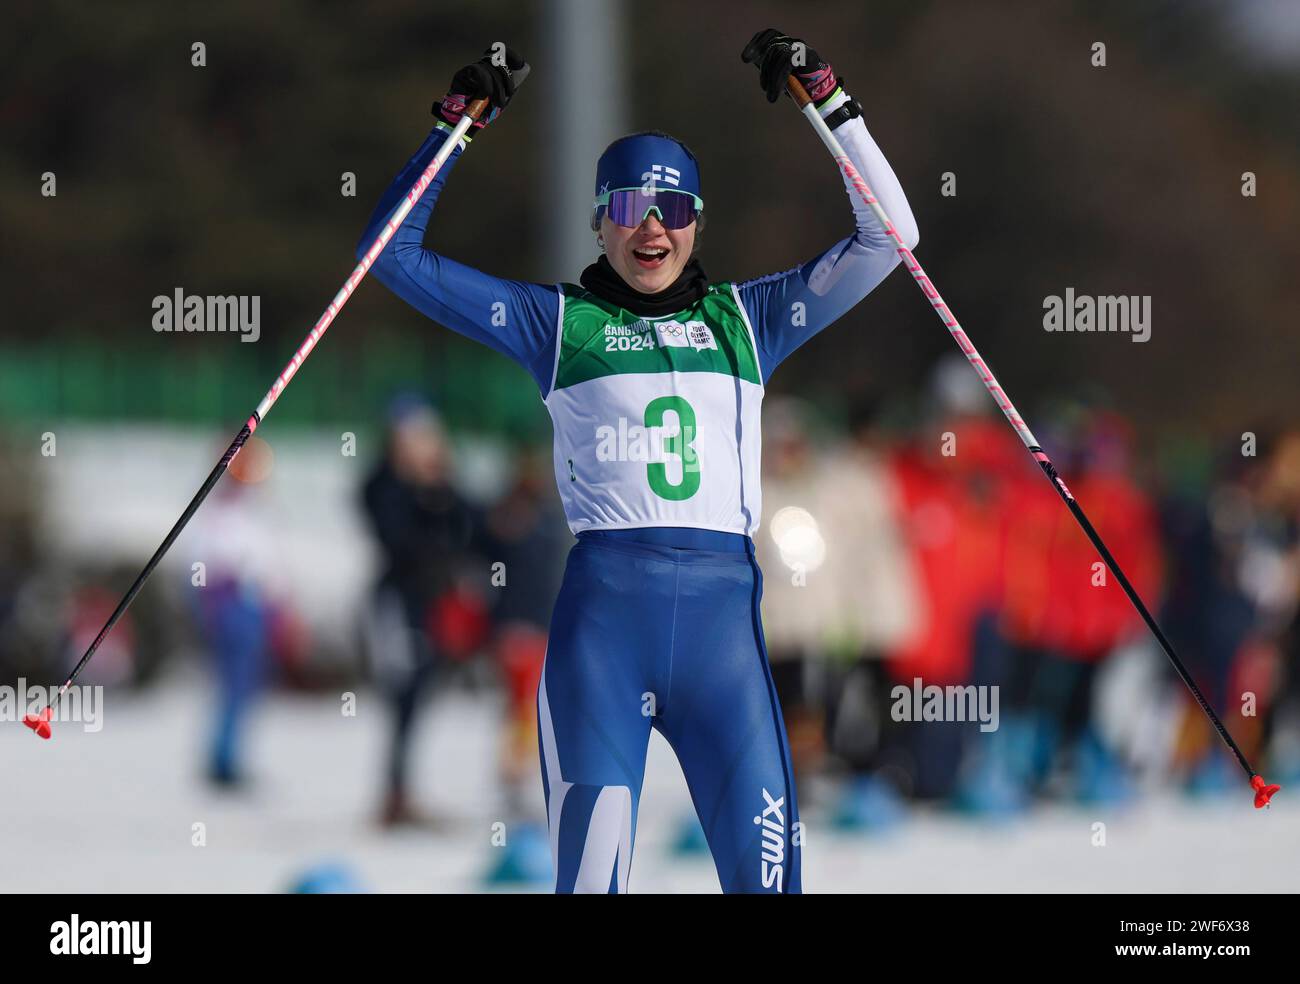 Pyeongchang, South Korea. 29th Jan, 2024. Nelli-Lotta Karppelin of Finland jubilates during the final of the Women's Sprint Free of Cross-Country Skiing event at the Gangwon 2024 Winter Youth Olympic Games in Pyeongchang, South Korea, Jan. 29, 2024. Credit: Hu Huhu/Xinhua/Alamy Live News Stock Photo